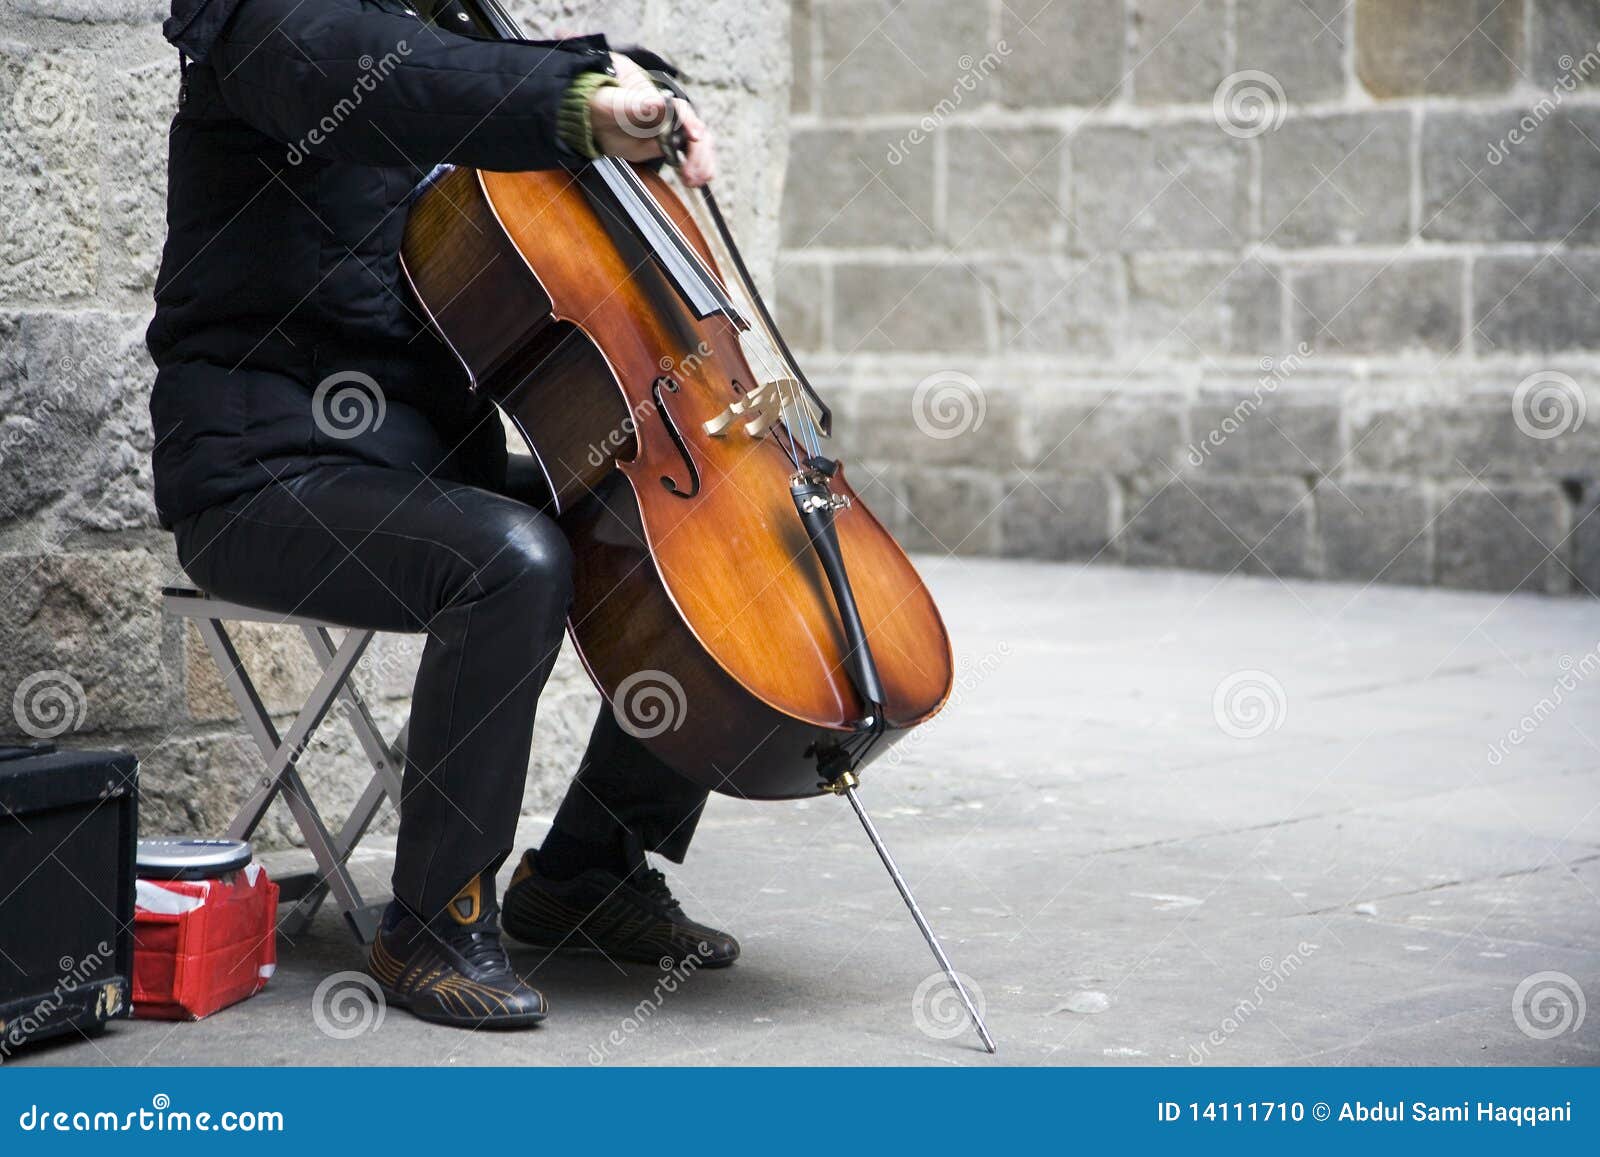 busker playing the cello